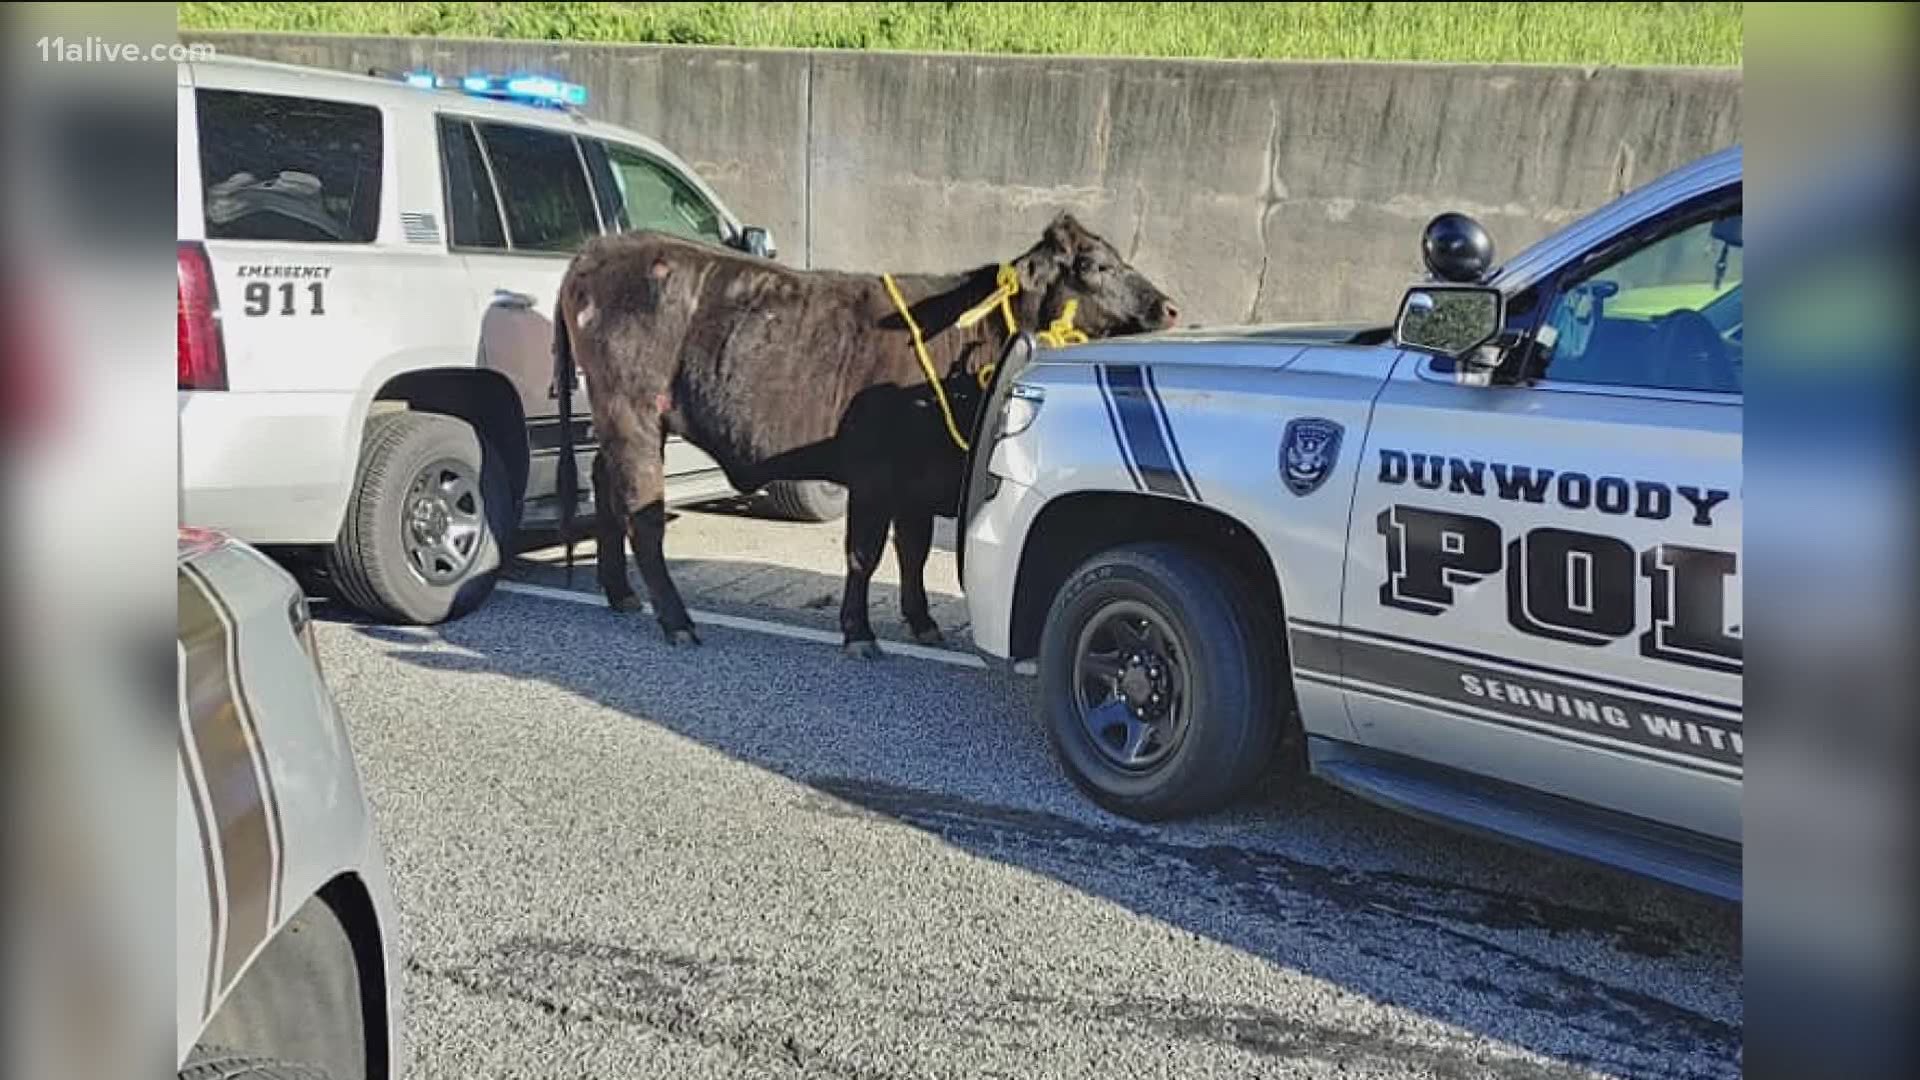 With the help of a citizen armed with a rope, officers were able to safely capture the cow and get it back to its owner.